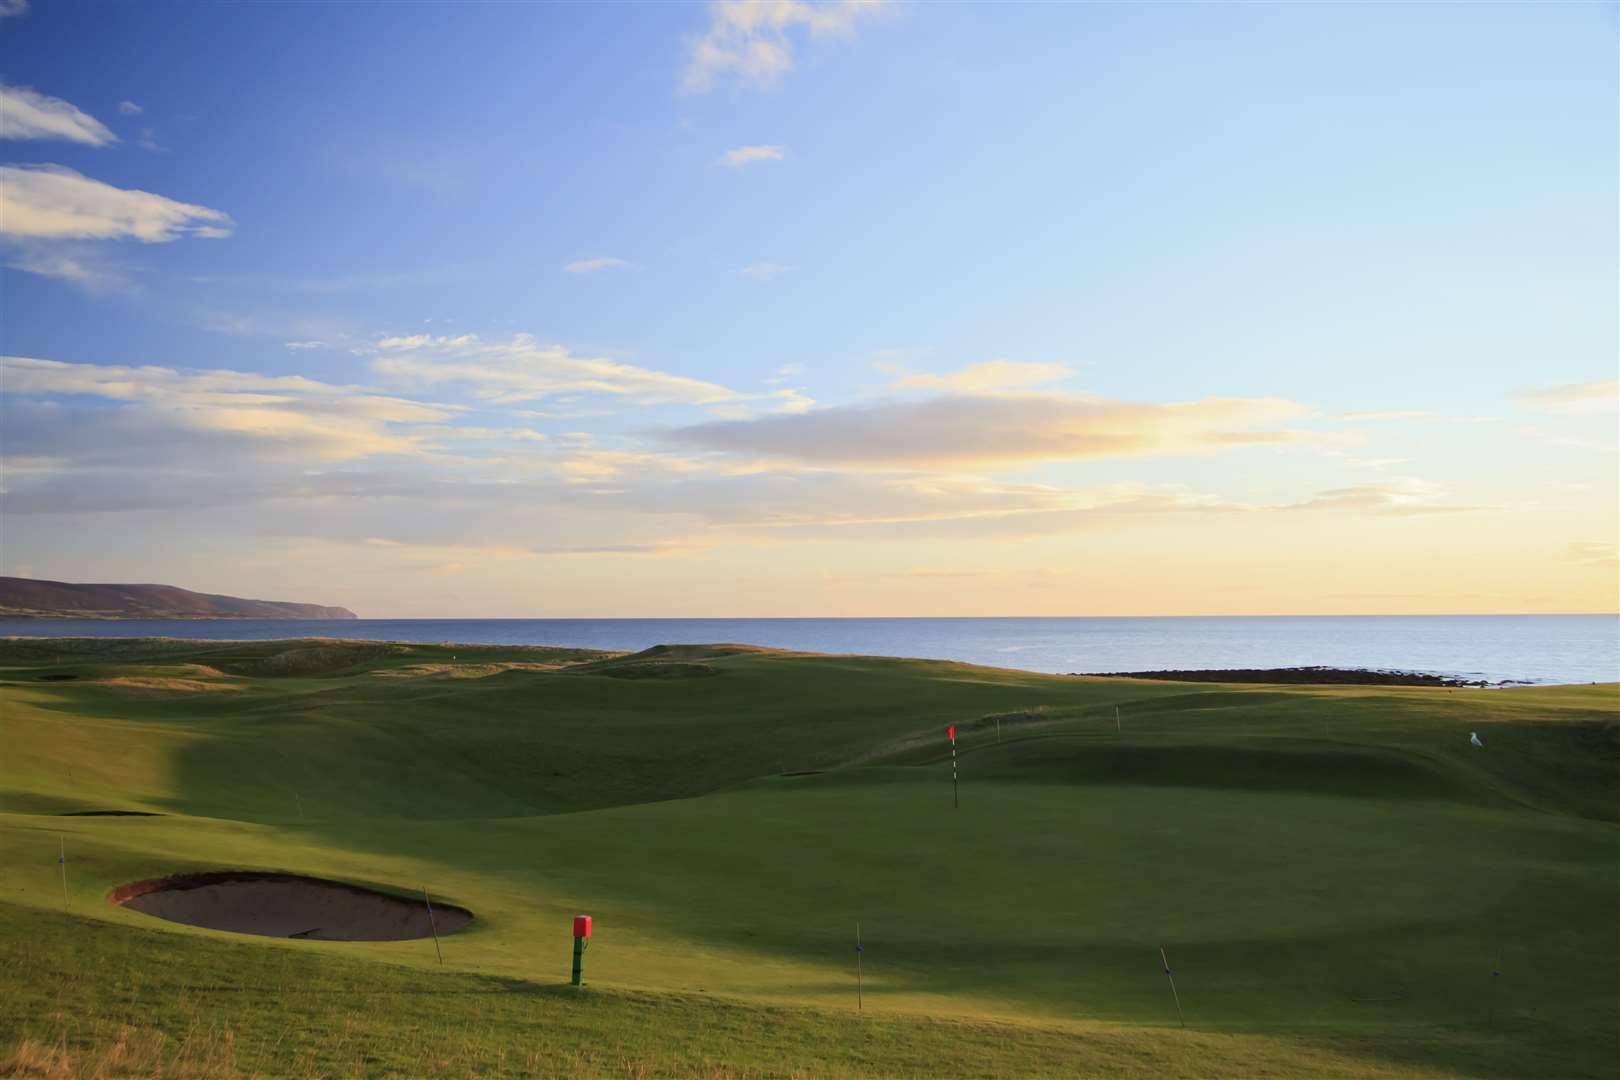 The 18th green and 1st hole at Brora Golf Course.